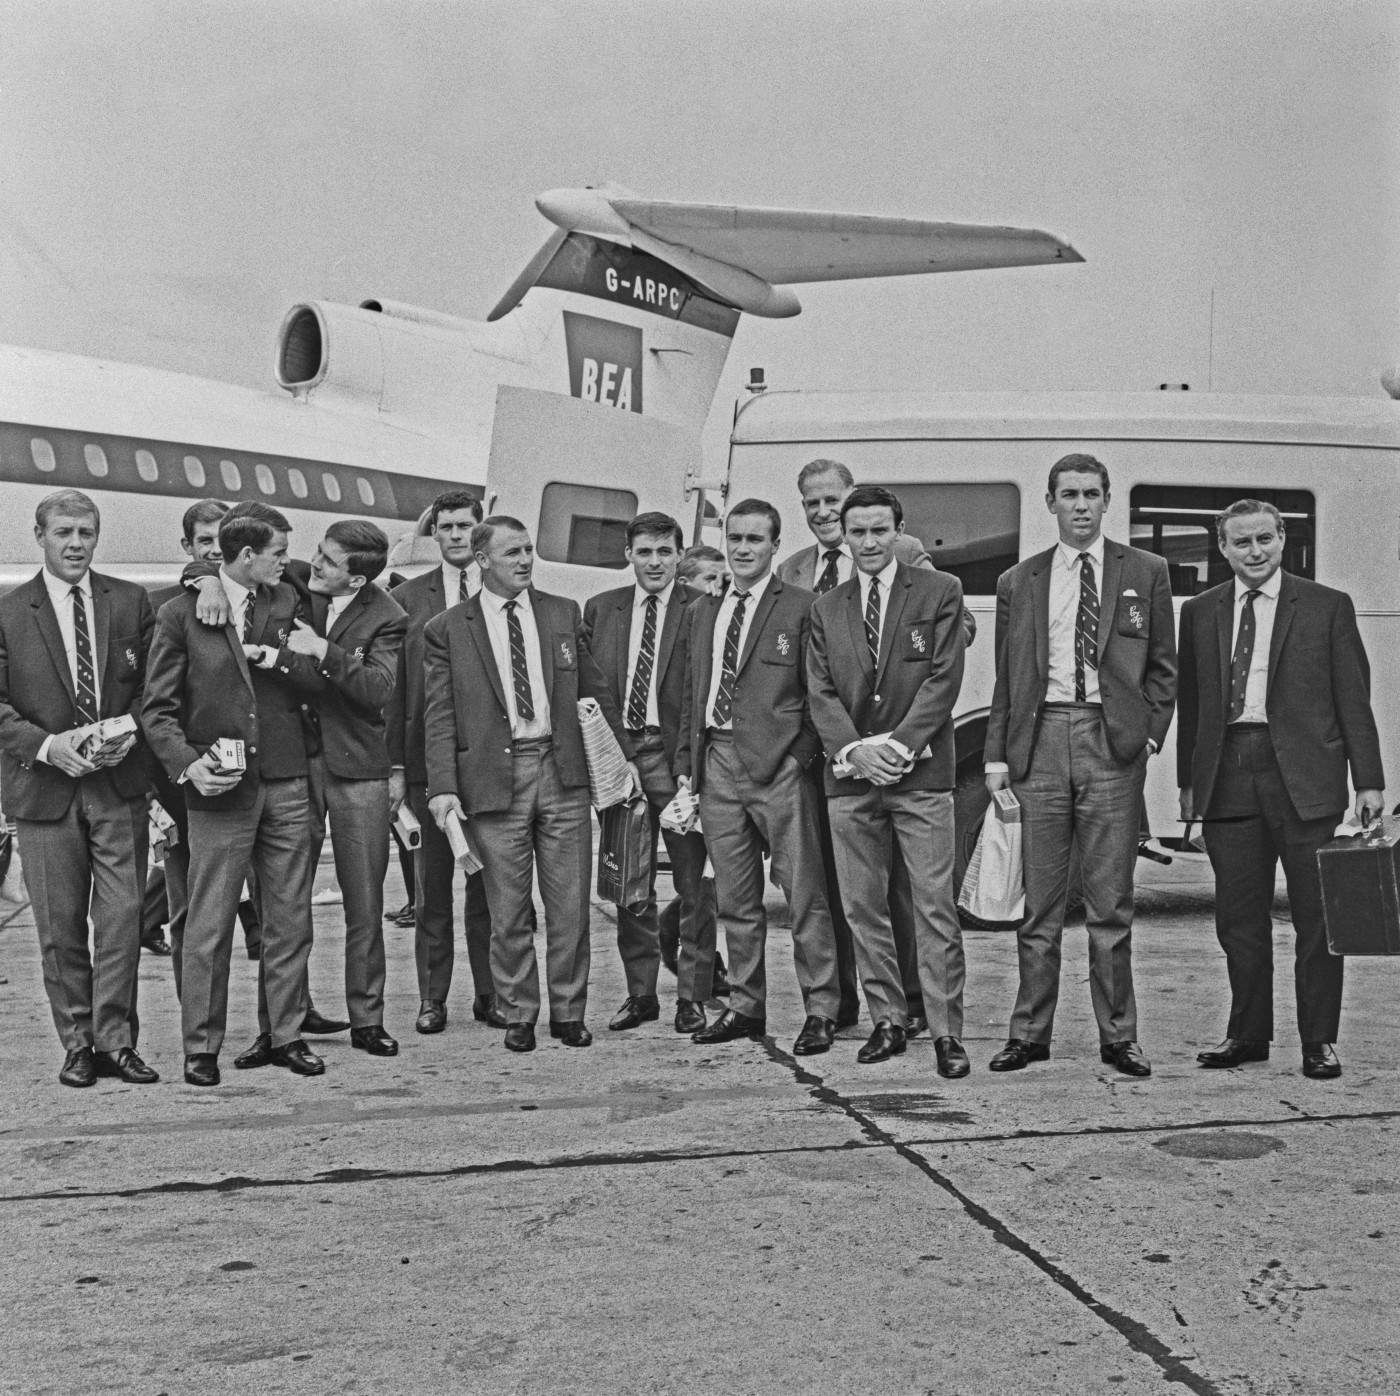 The Blues depart to take on Roma in the first round of the Fairs Cup the following season